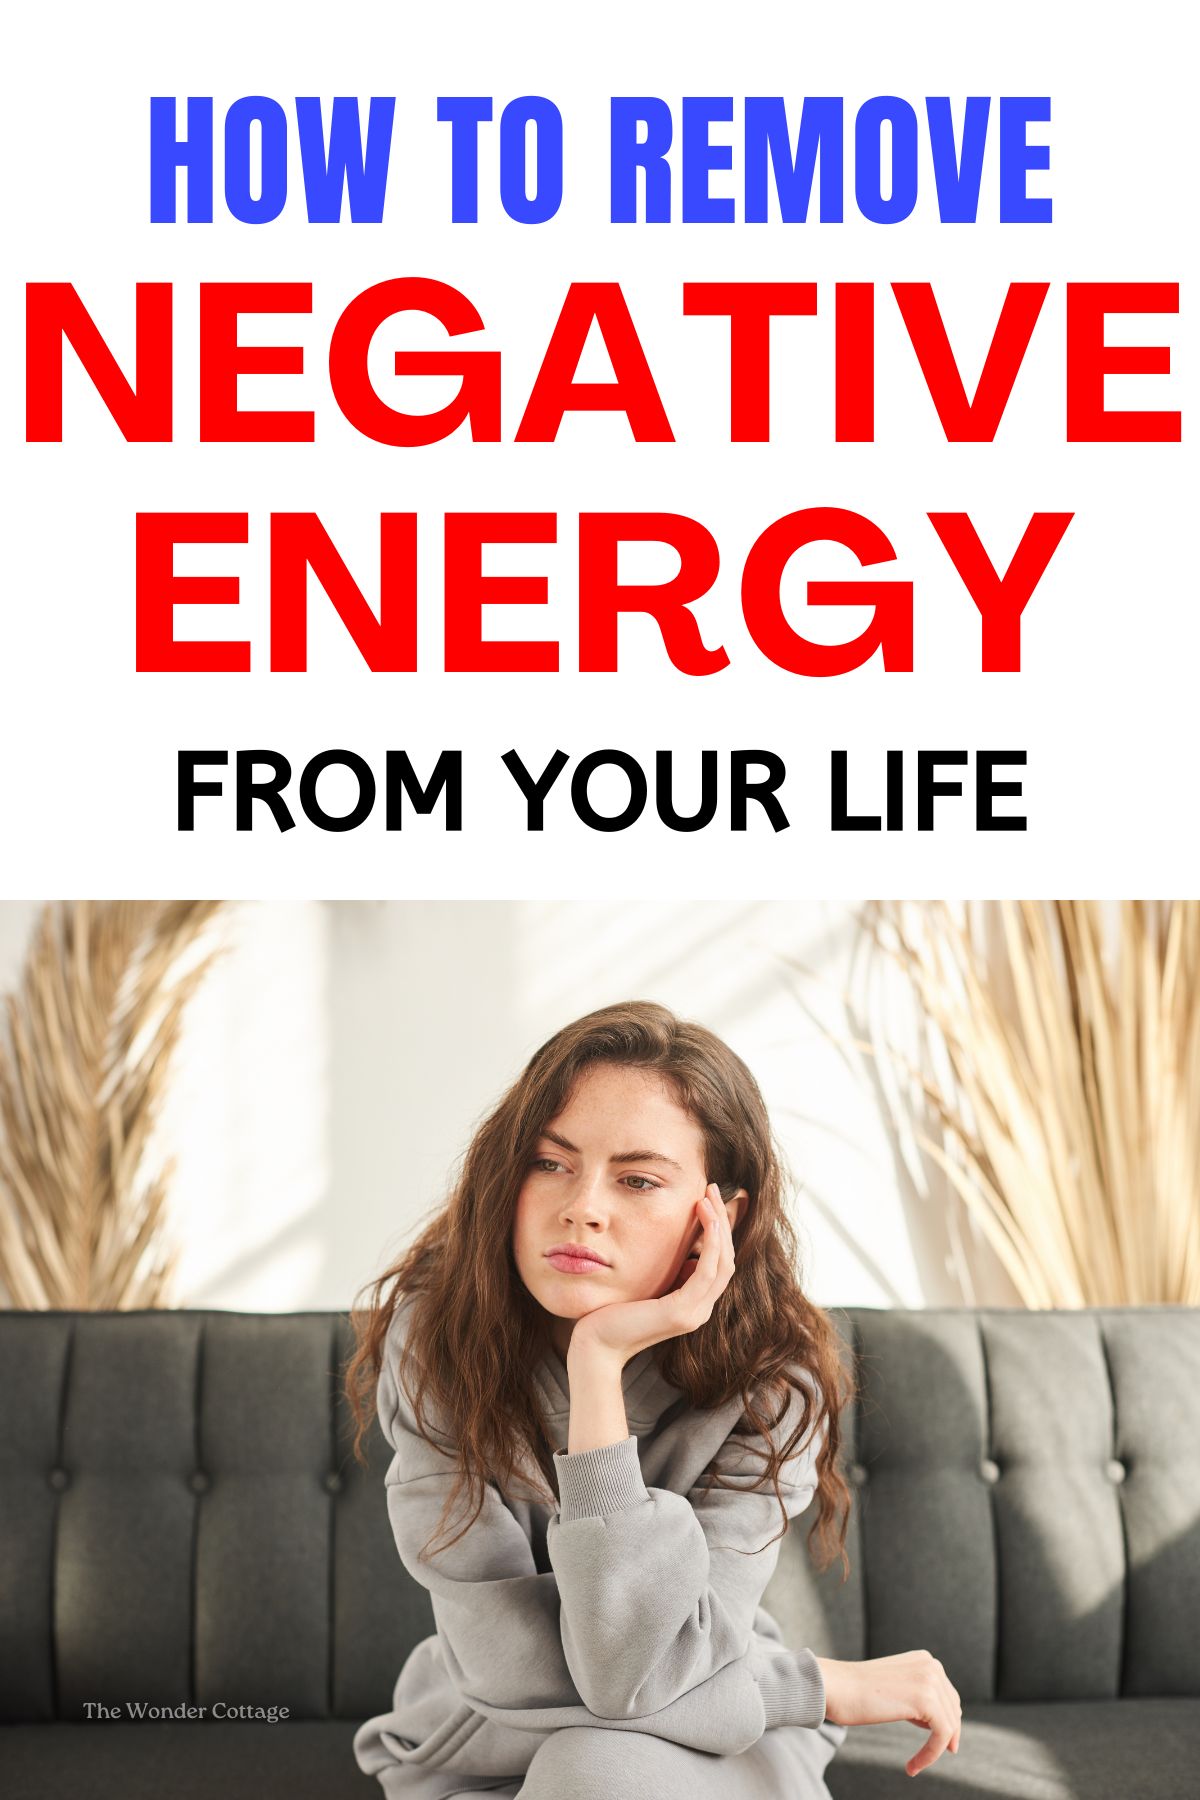 How To Remove Negative Energy From Your Life